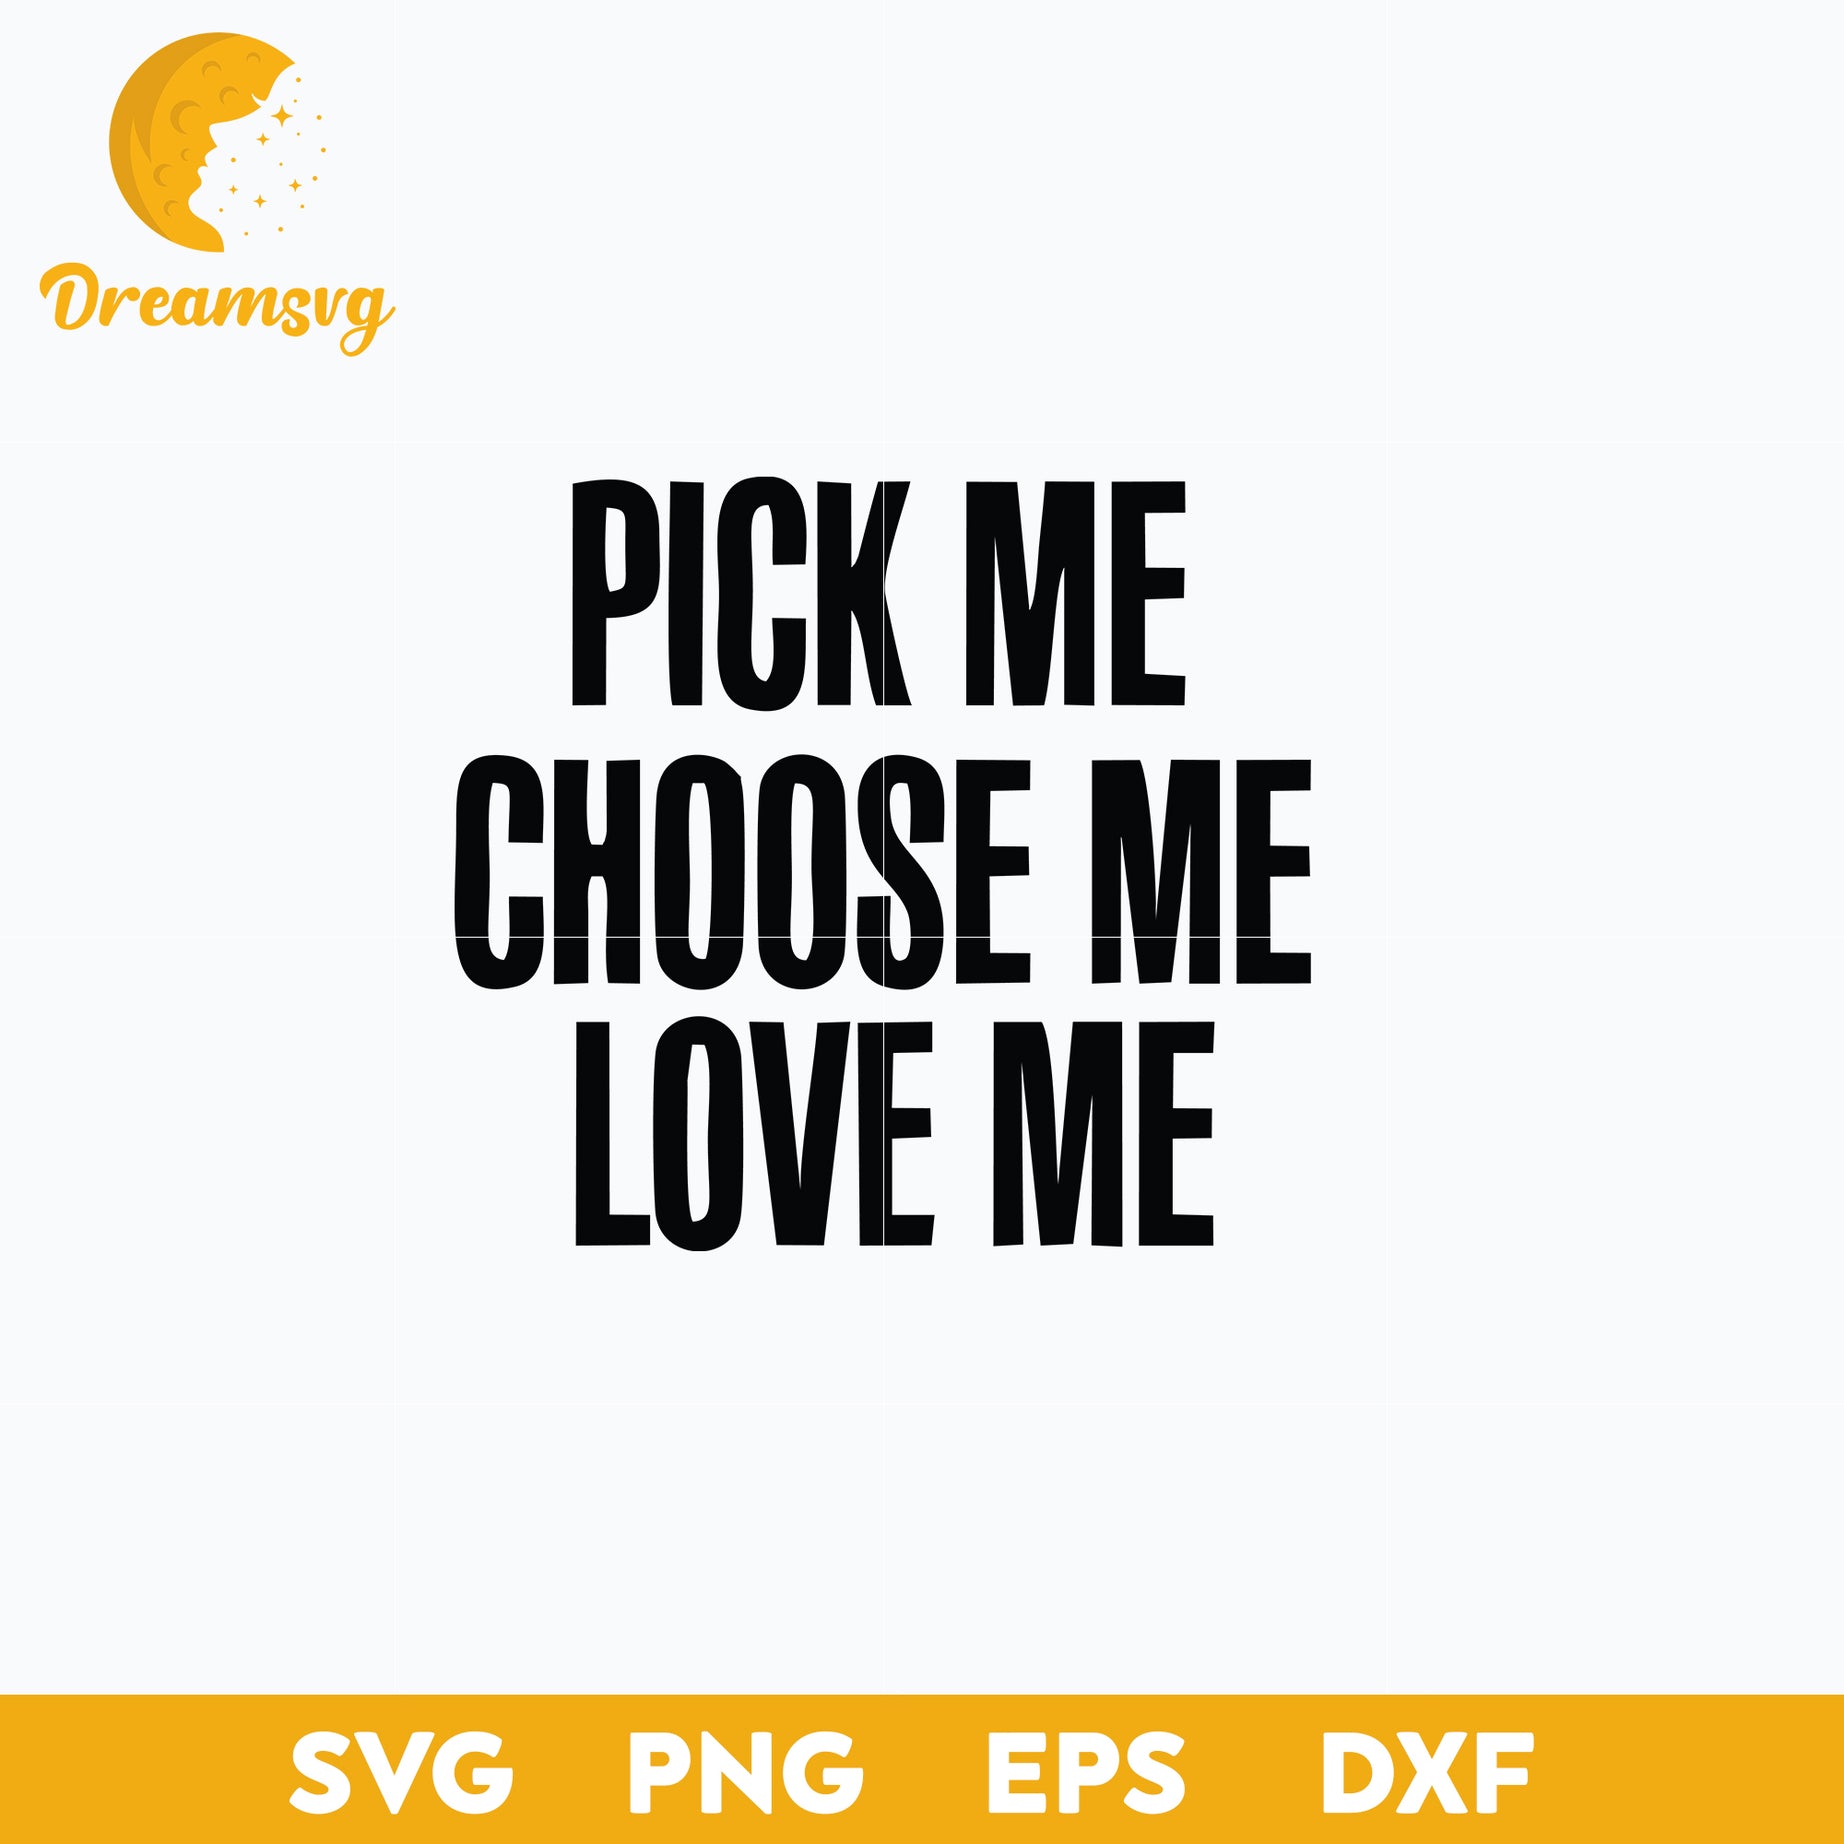 Greys Anatomy svg, You are my person svg, Save lives svg, It's a Beautiful Day svg, Grey's Anatomy Tv Show Svg, Cut files for Cricut, png, dxf, eps digital file